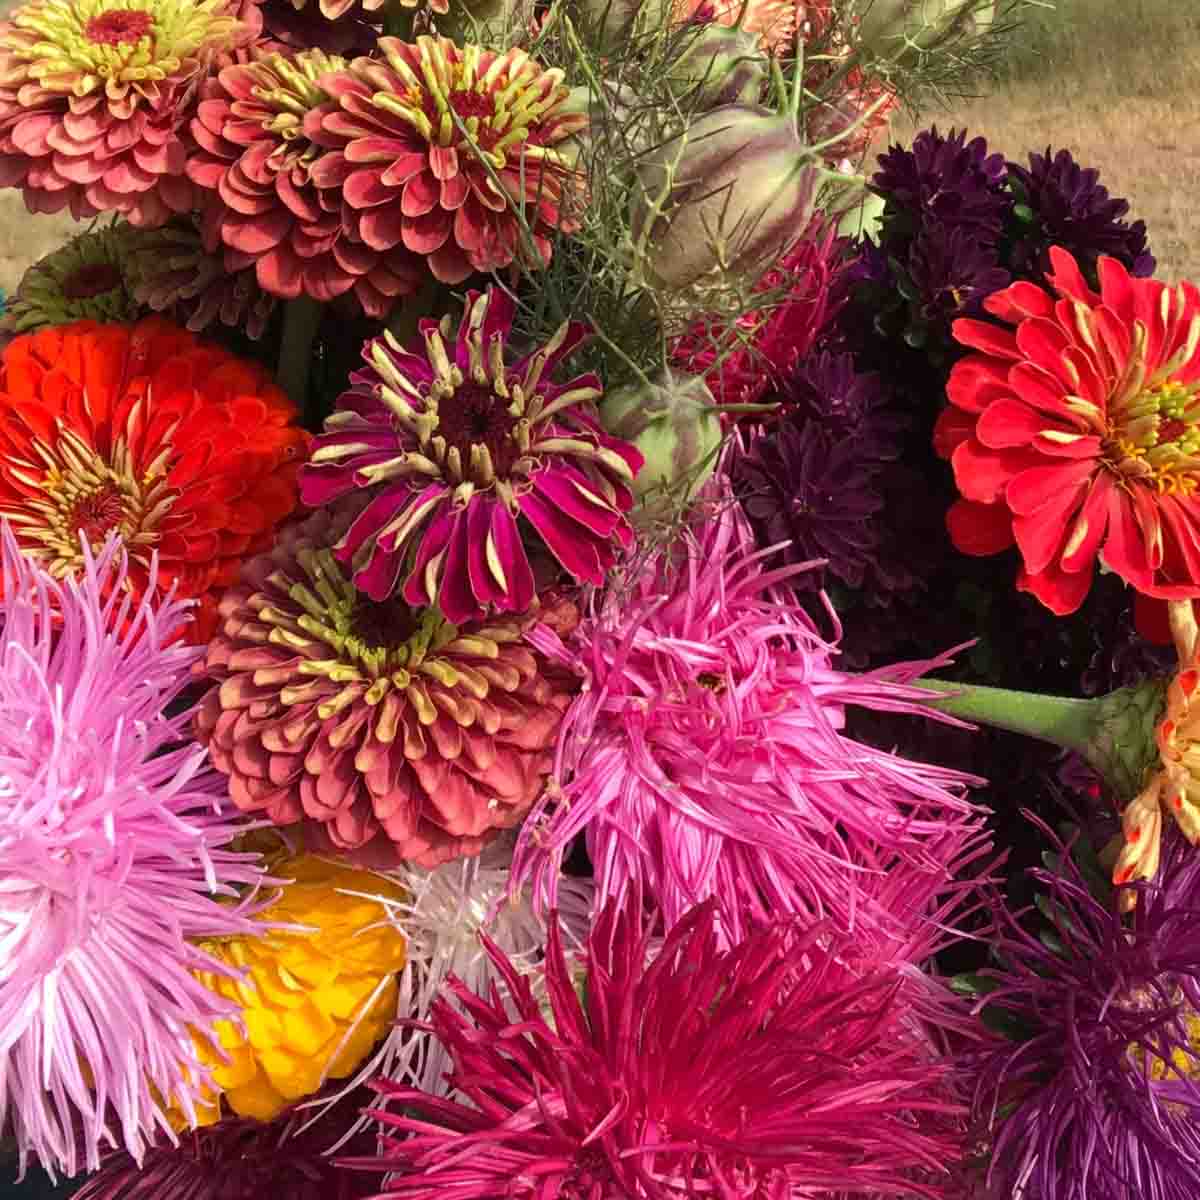 A variety of flowers grown on the Soil Stewards Farm